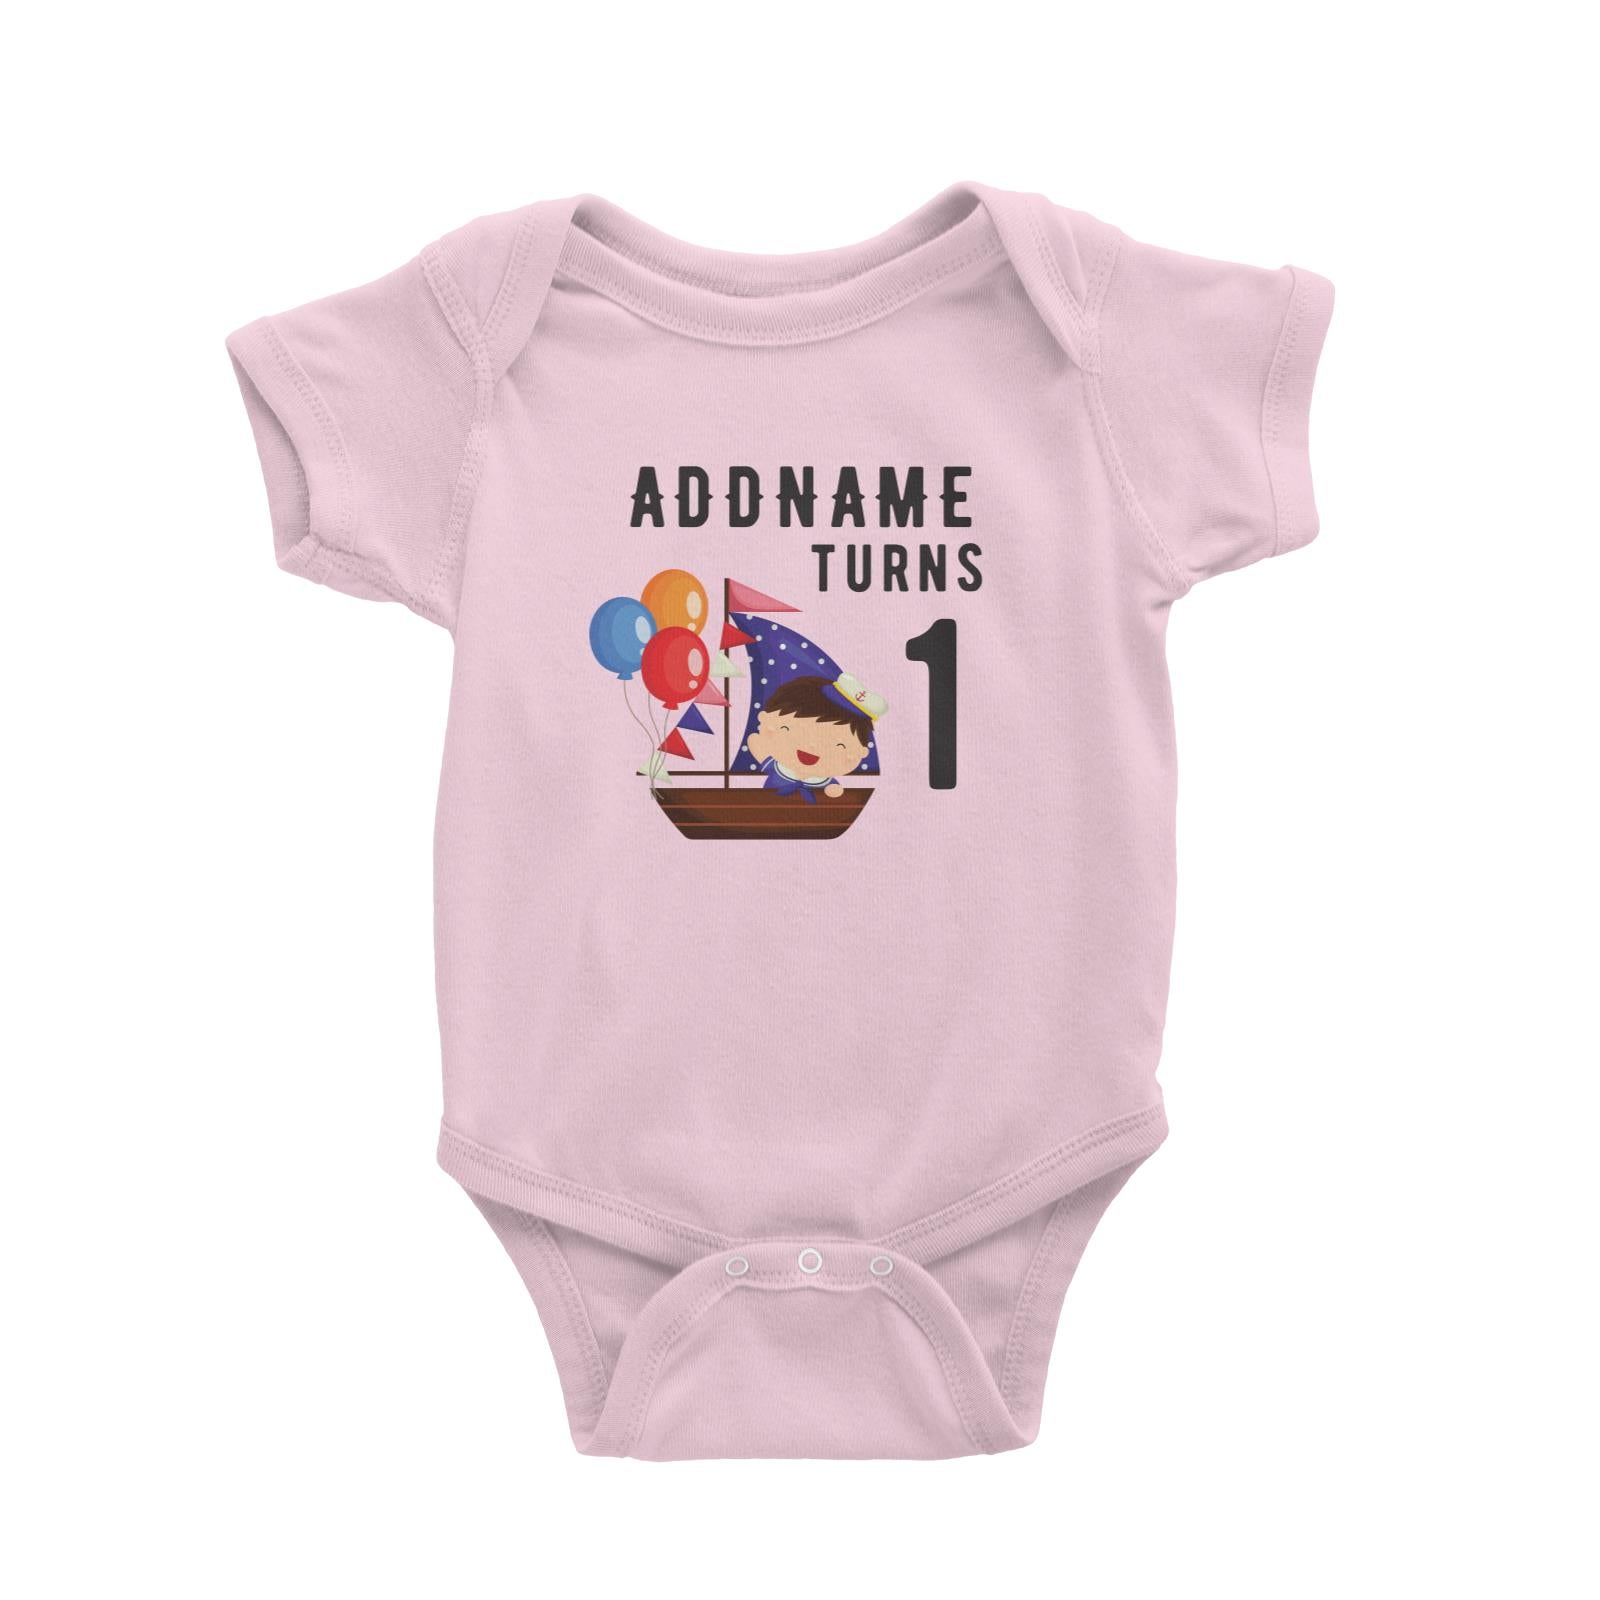 Birthday Sailor Baby Boy In Ship With Balloon Addname Turns 1 Baby Romper